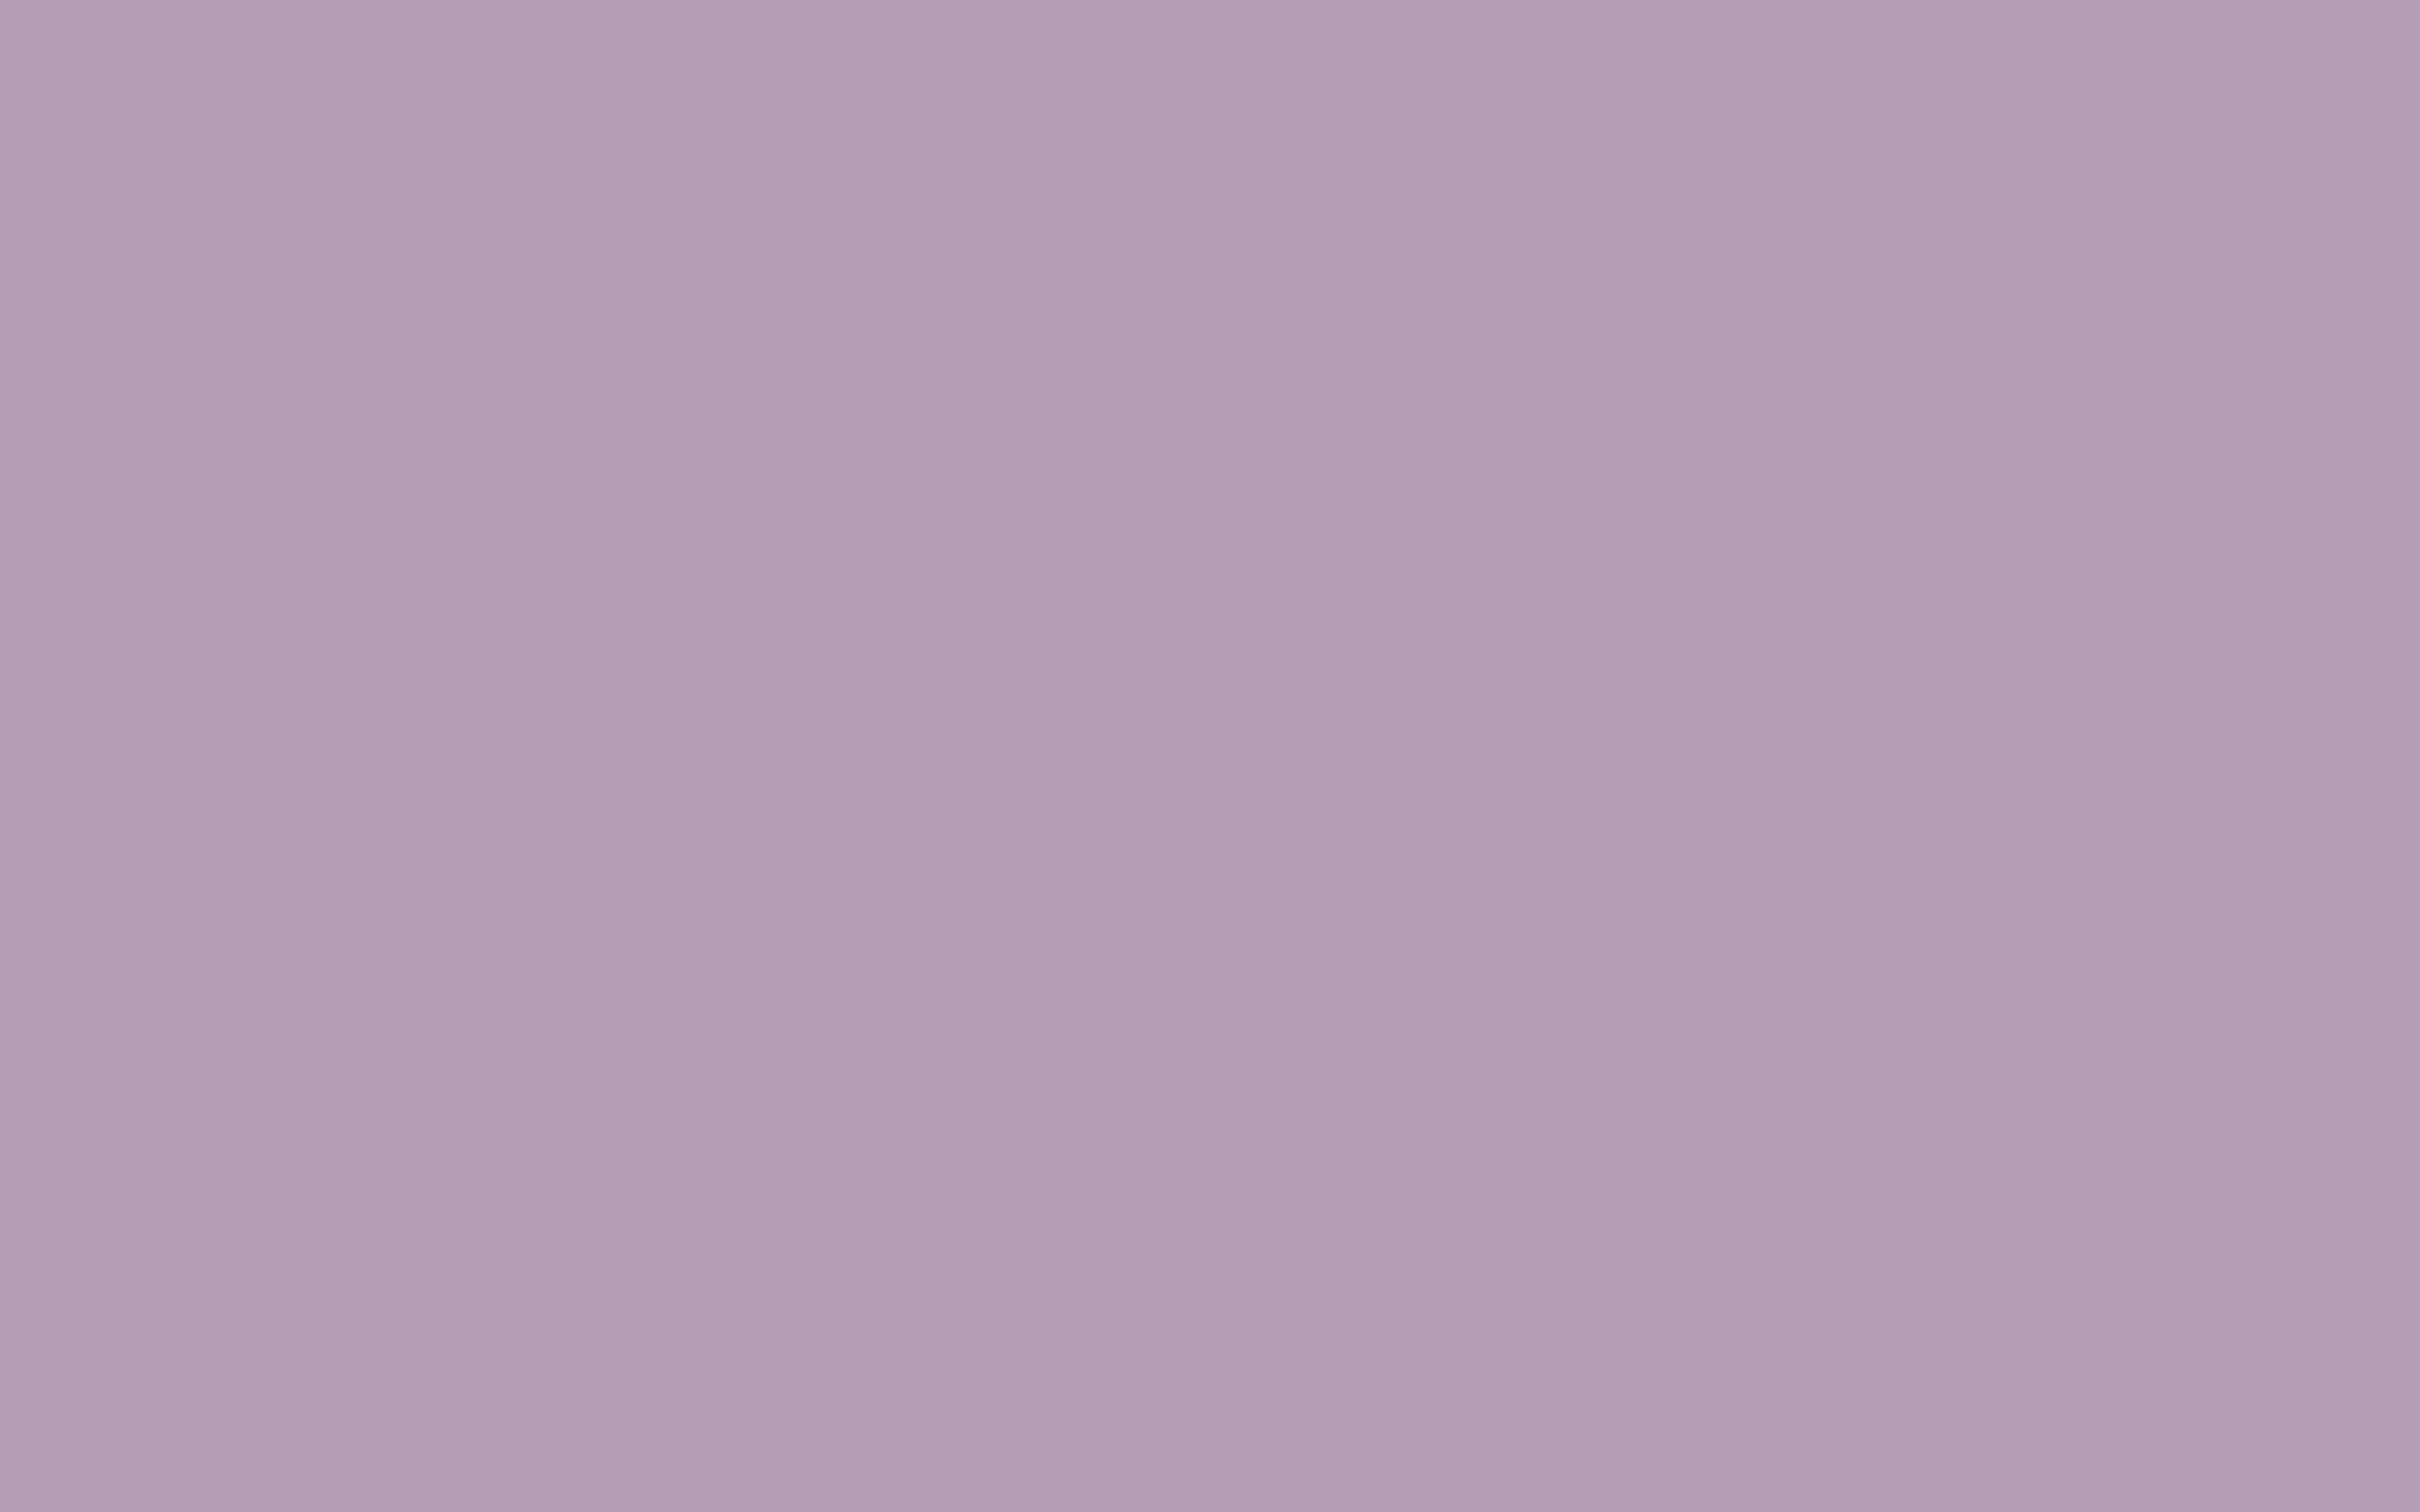 Free 2880x1800 resolution Pastel Purple solid color background view